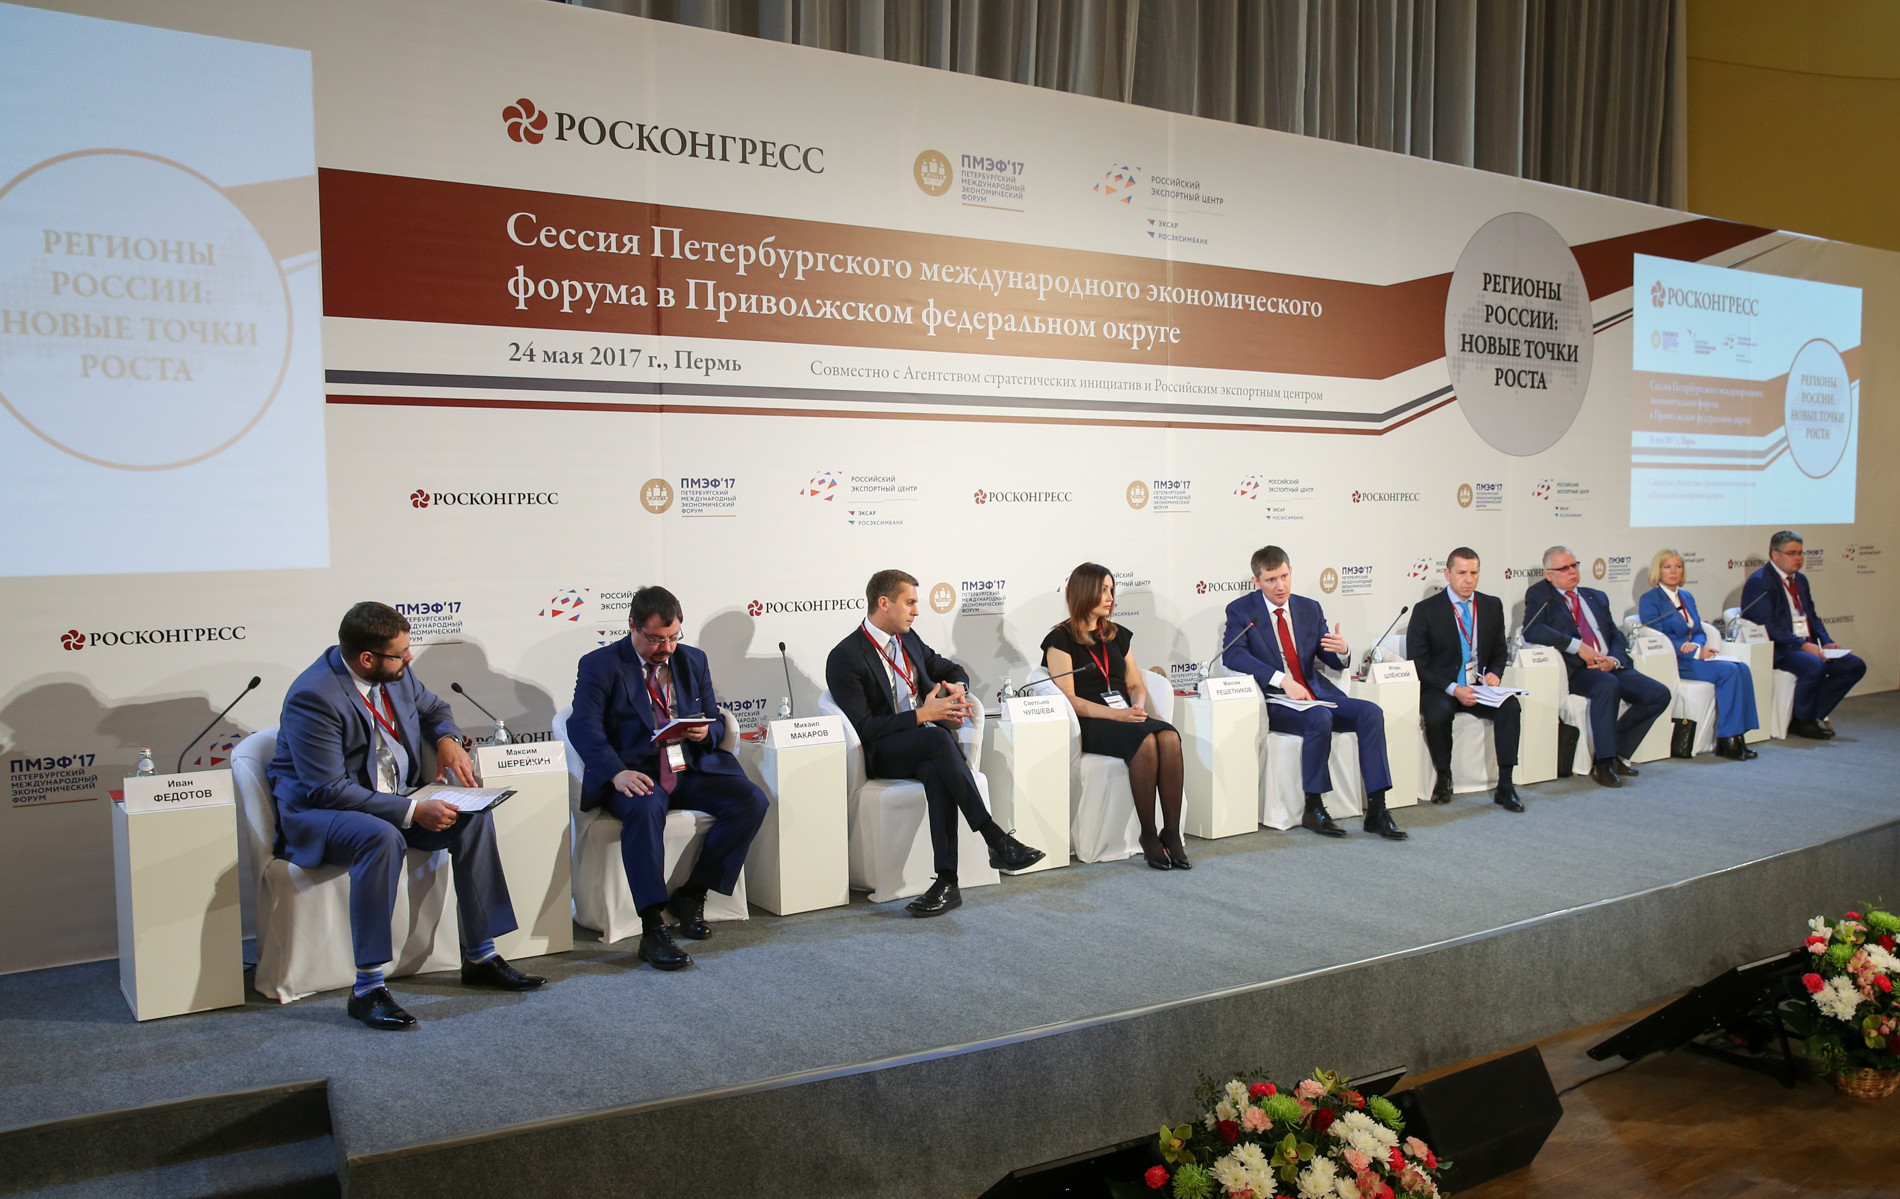 Perm session completes cycle of regional offsite events in run-up to SPIEF 2017